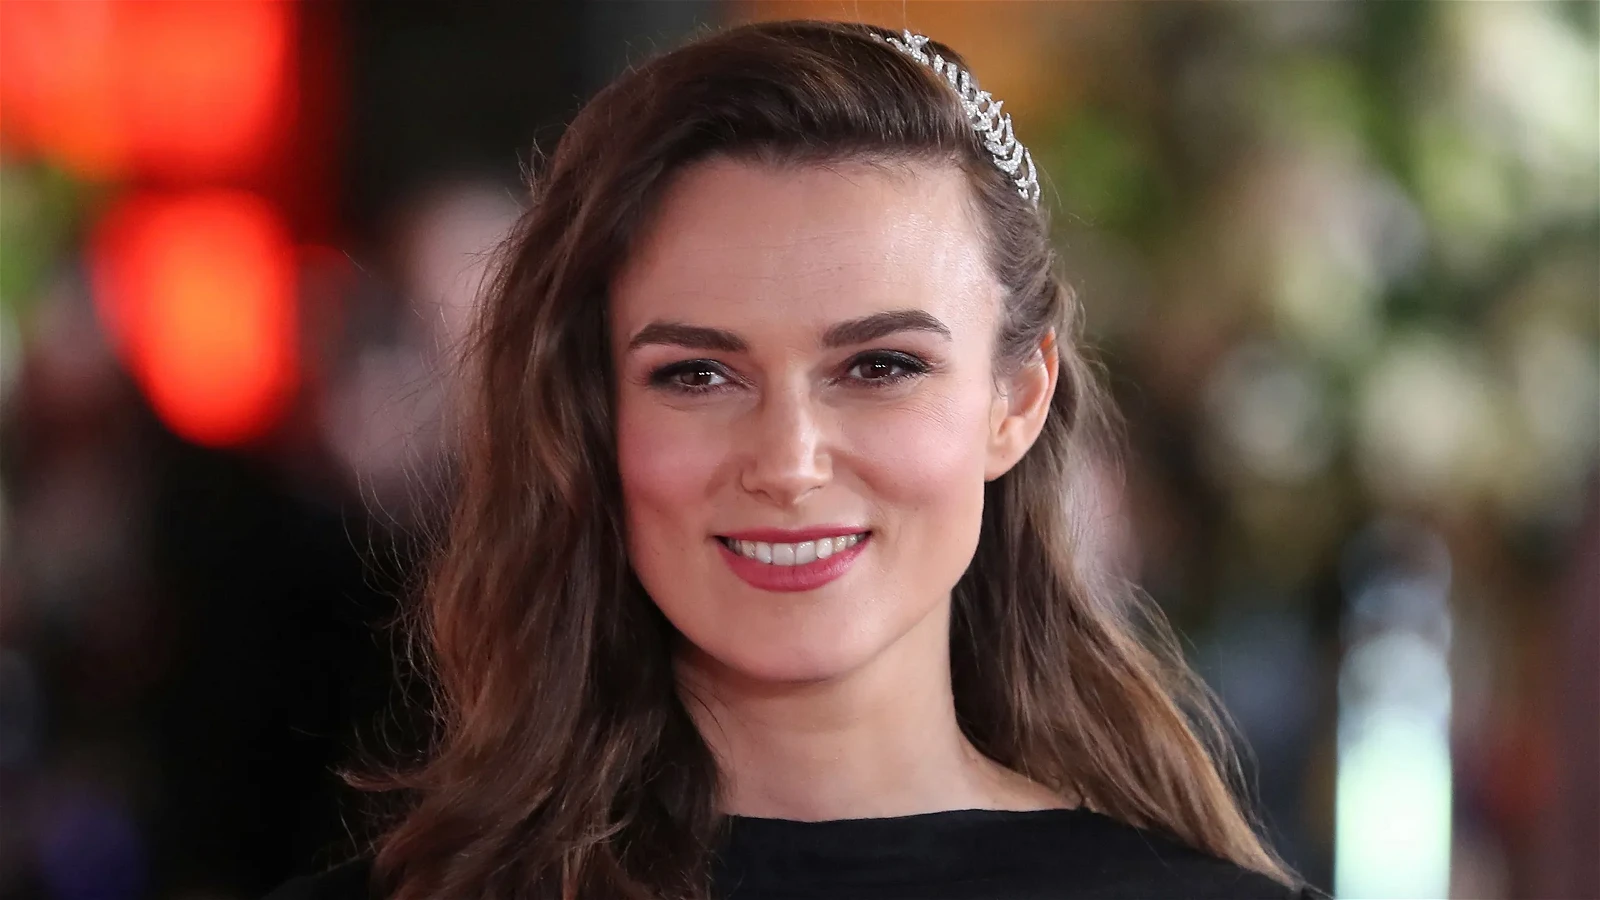 Keira Knightly has been getting harassed by 'angry fans' lately